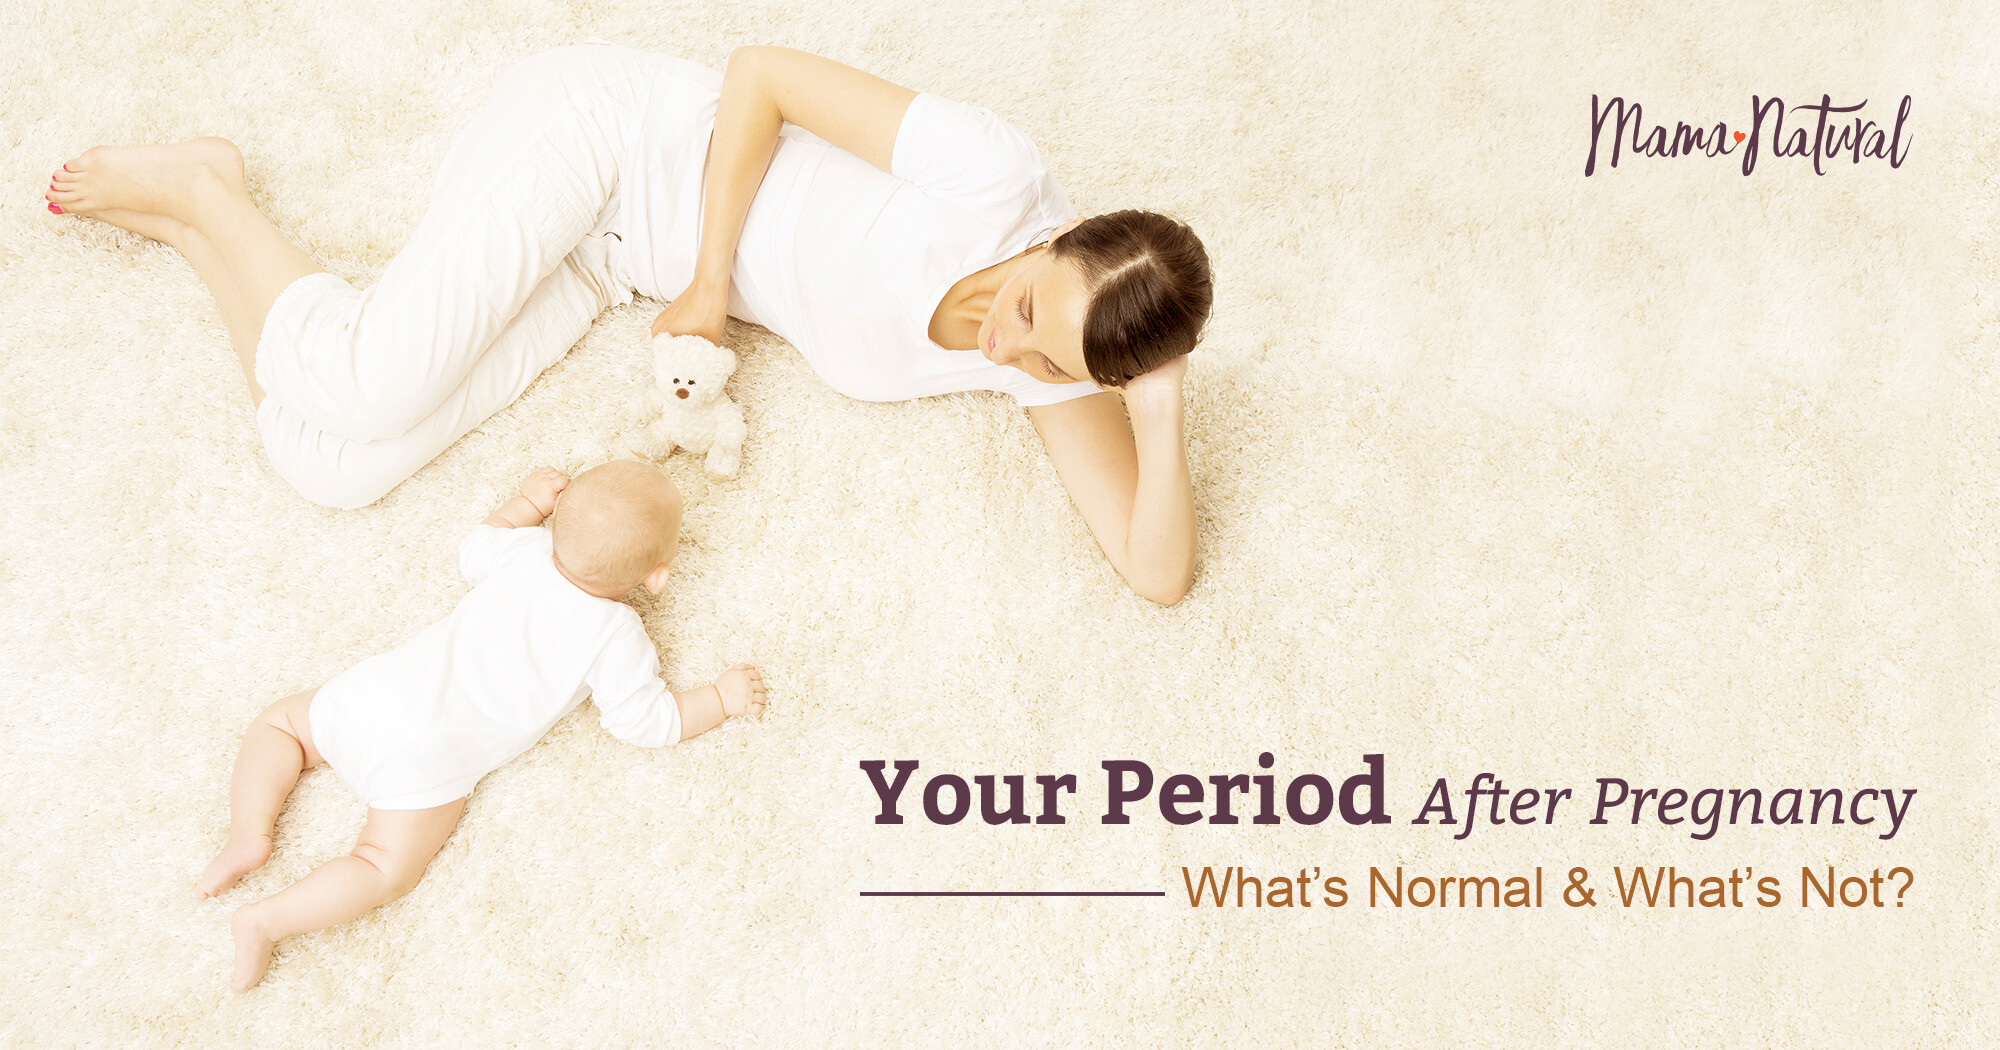 Your Postpartum Care Plan: How to Stay Healthy During the 4th Trimester -  Mama Natural